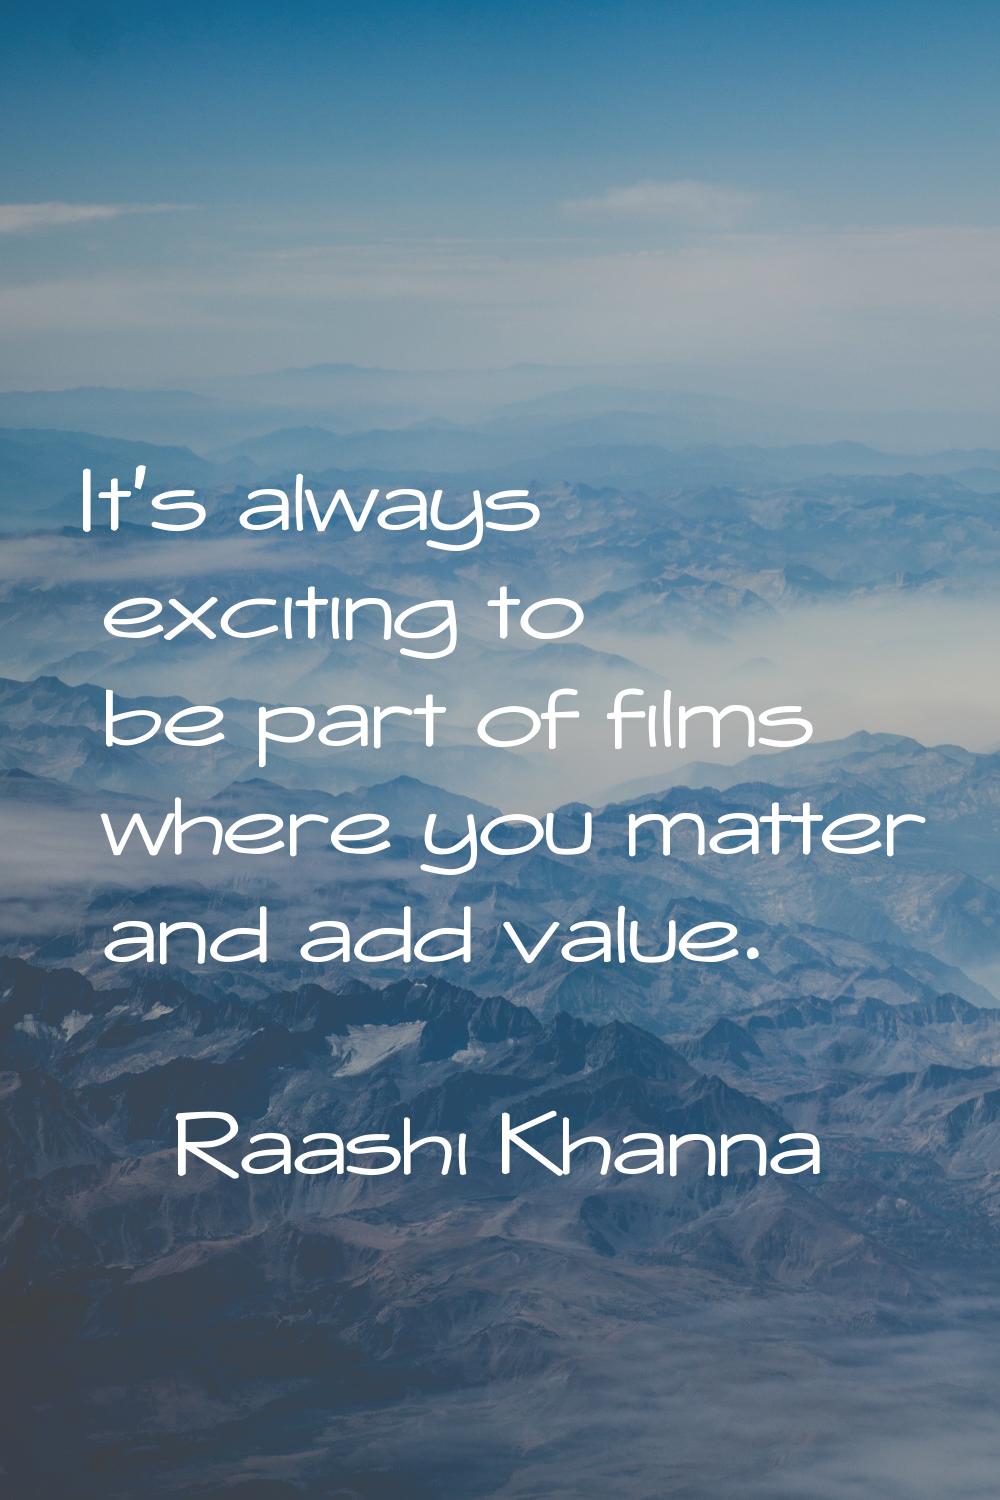 It's always exciting to be part of films where you matter and add value.